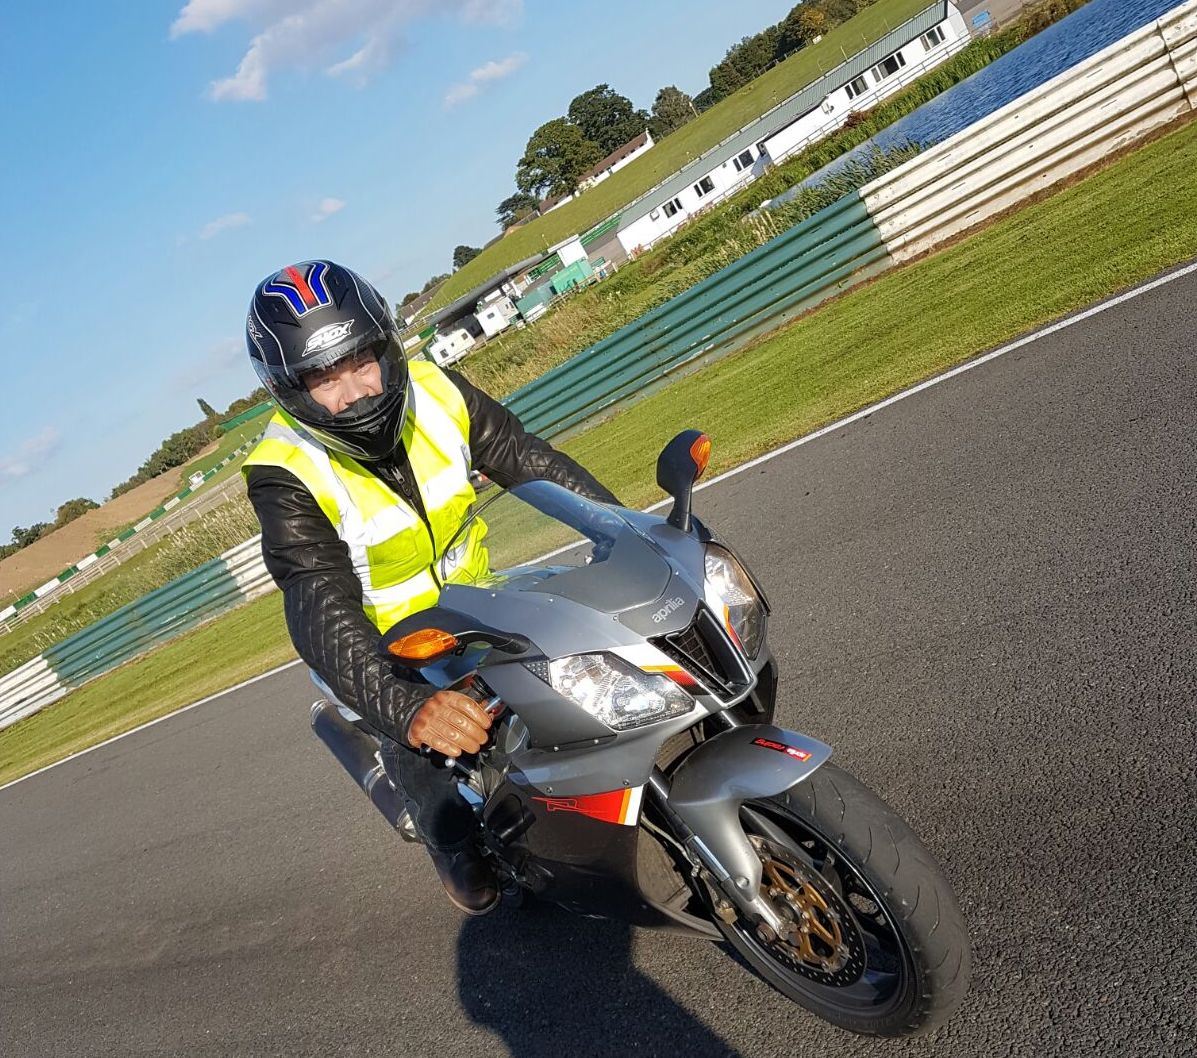 Motorcycle theory CBT Direct Access Motorcycle Training, Coventry, Loughborough, Leicester, Sutton Coldfield, Solihull